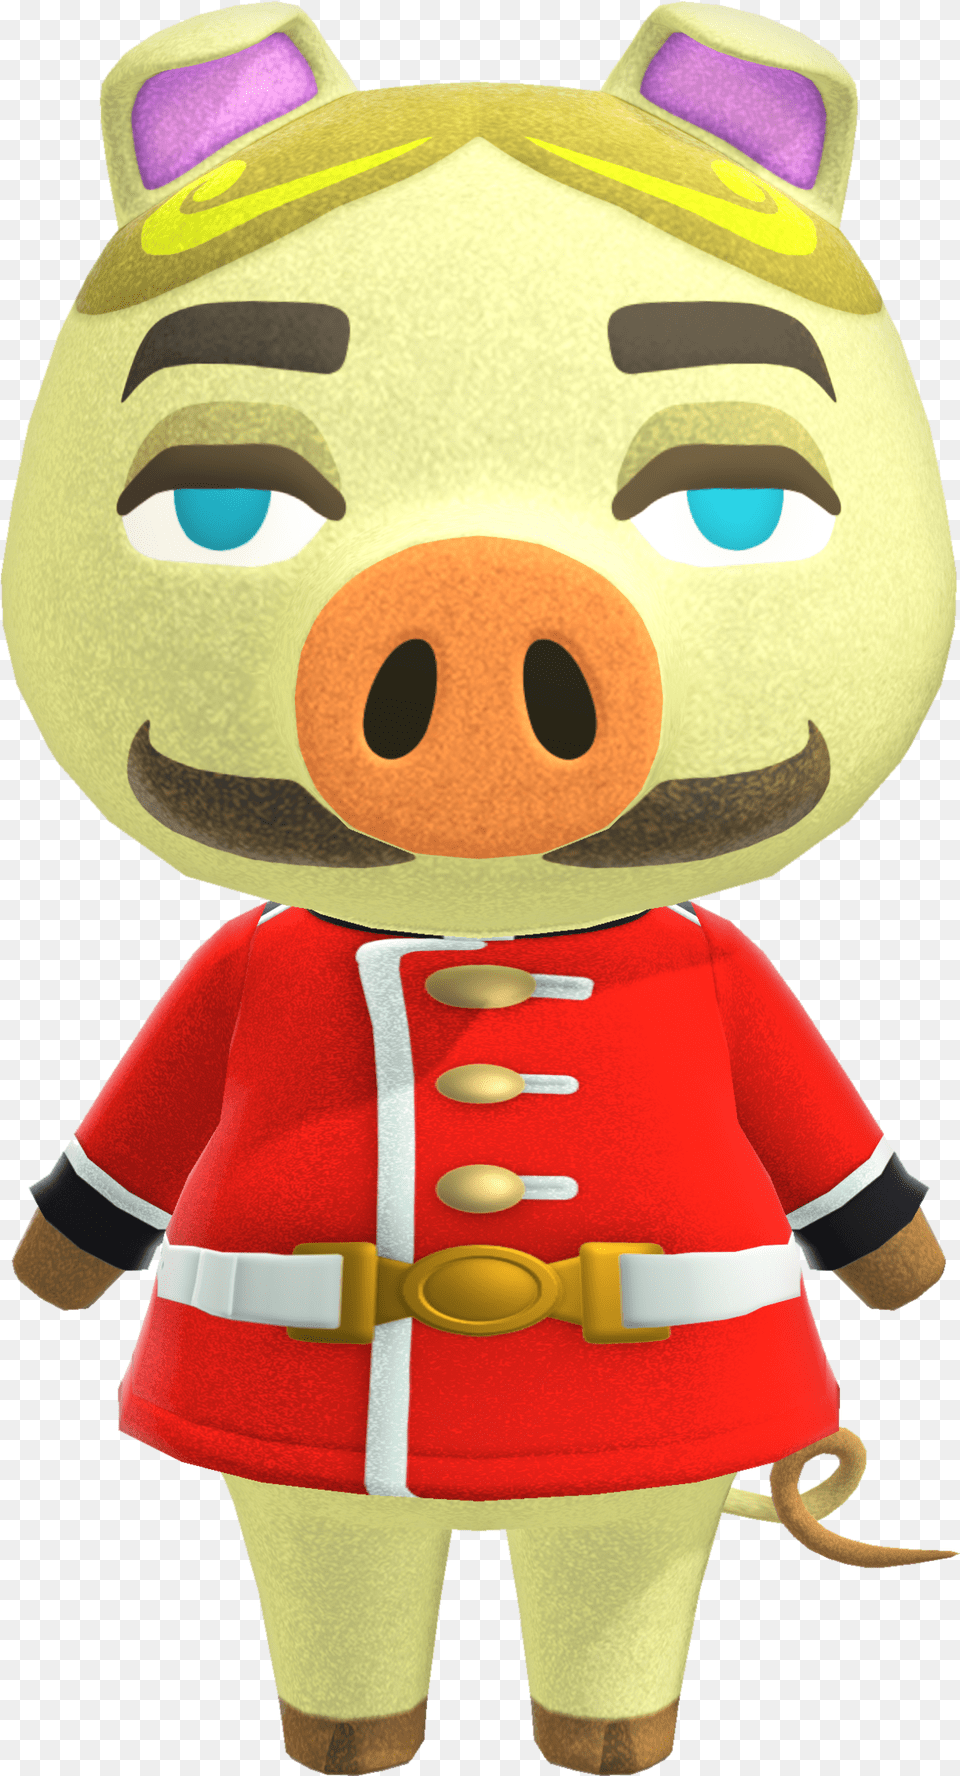 Chops Animal Crossing Wiki Nookipedia Chops Animal Crossing New Horizons, Plush, Toy Png